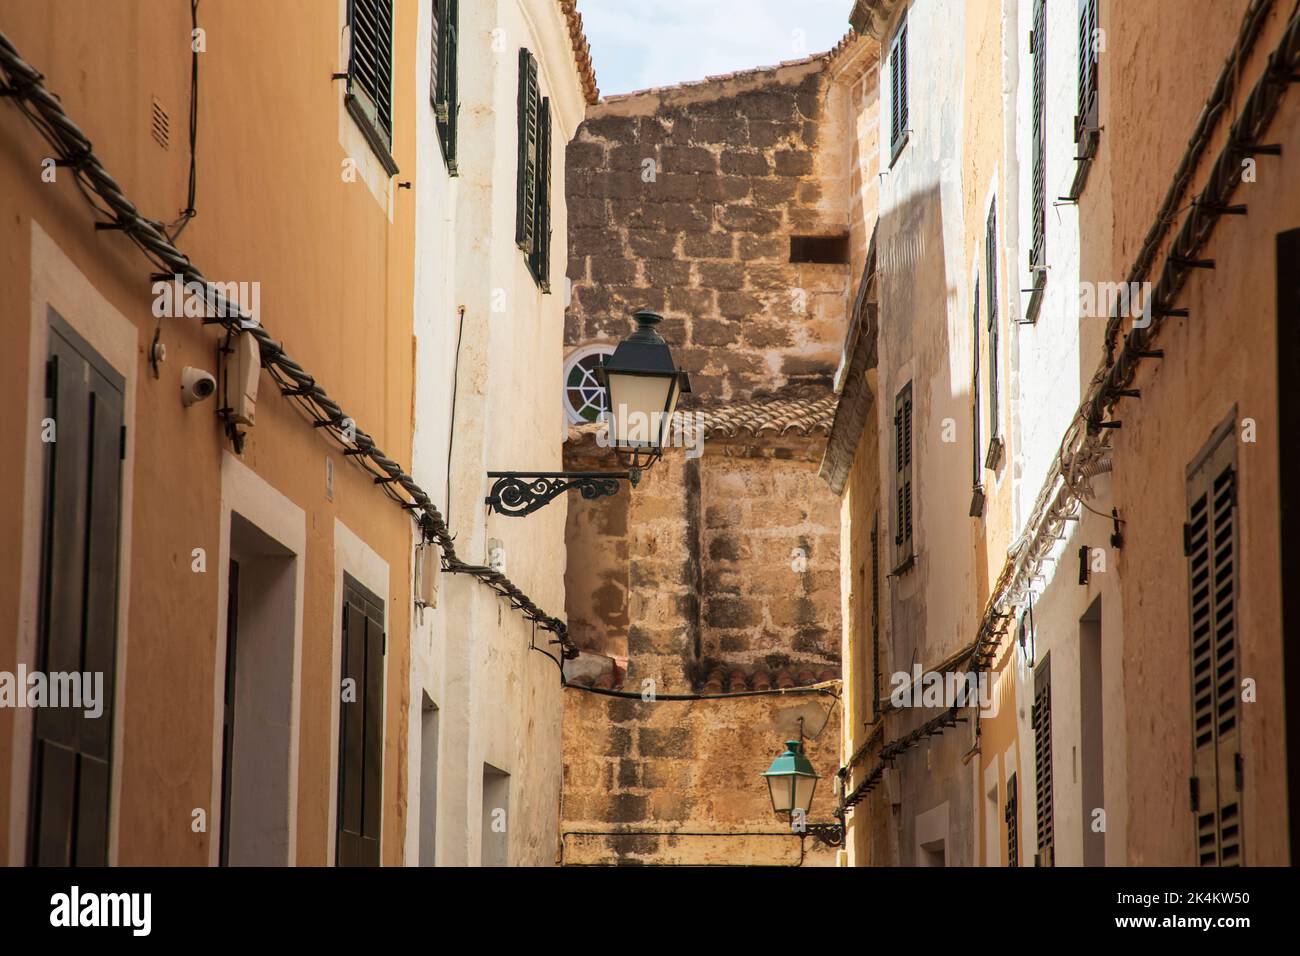 Ciutadella, Spain - September 5th, 2022: Ciutadella is a very attractive city, with a charming port and an old town. Stock Photo